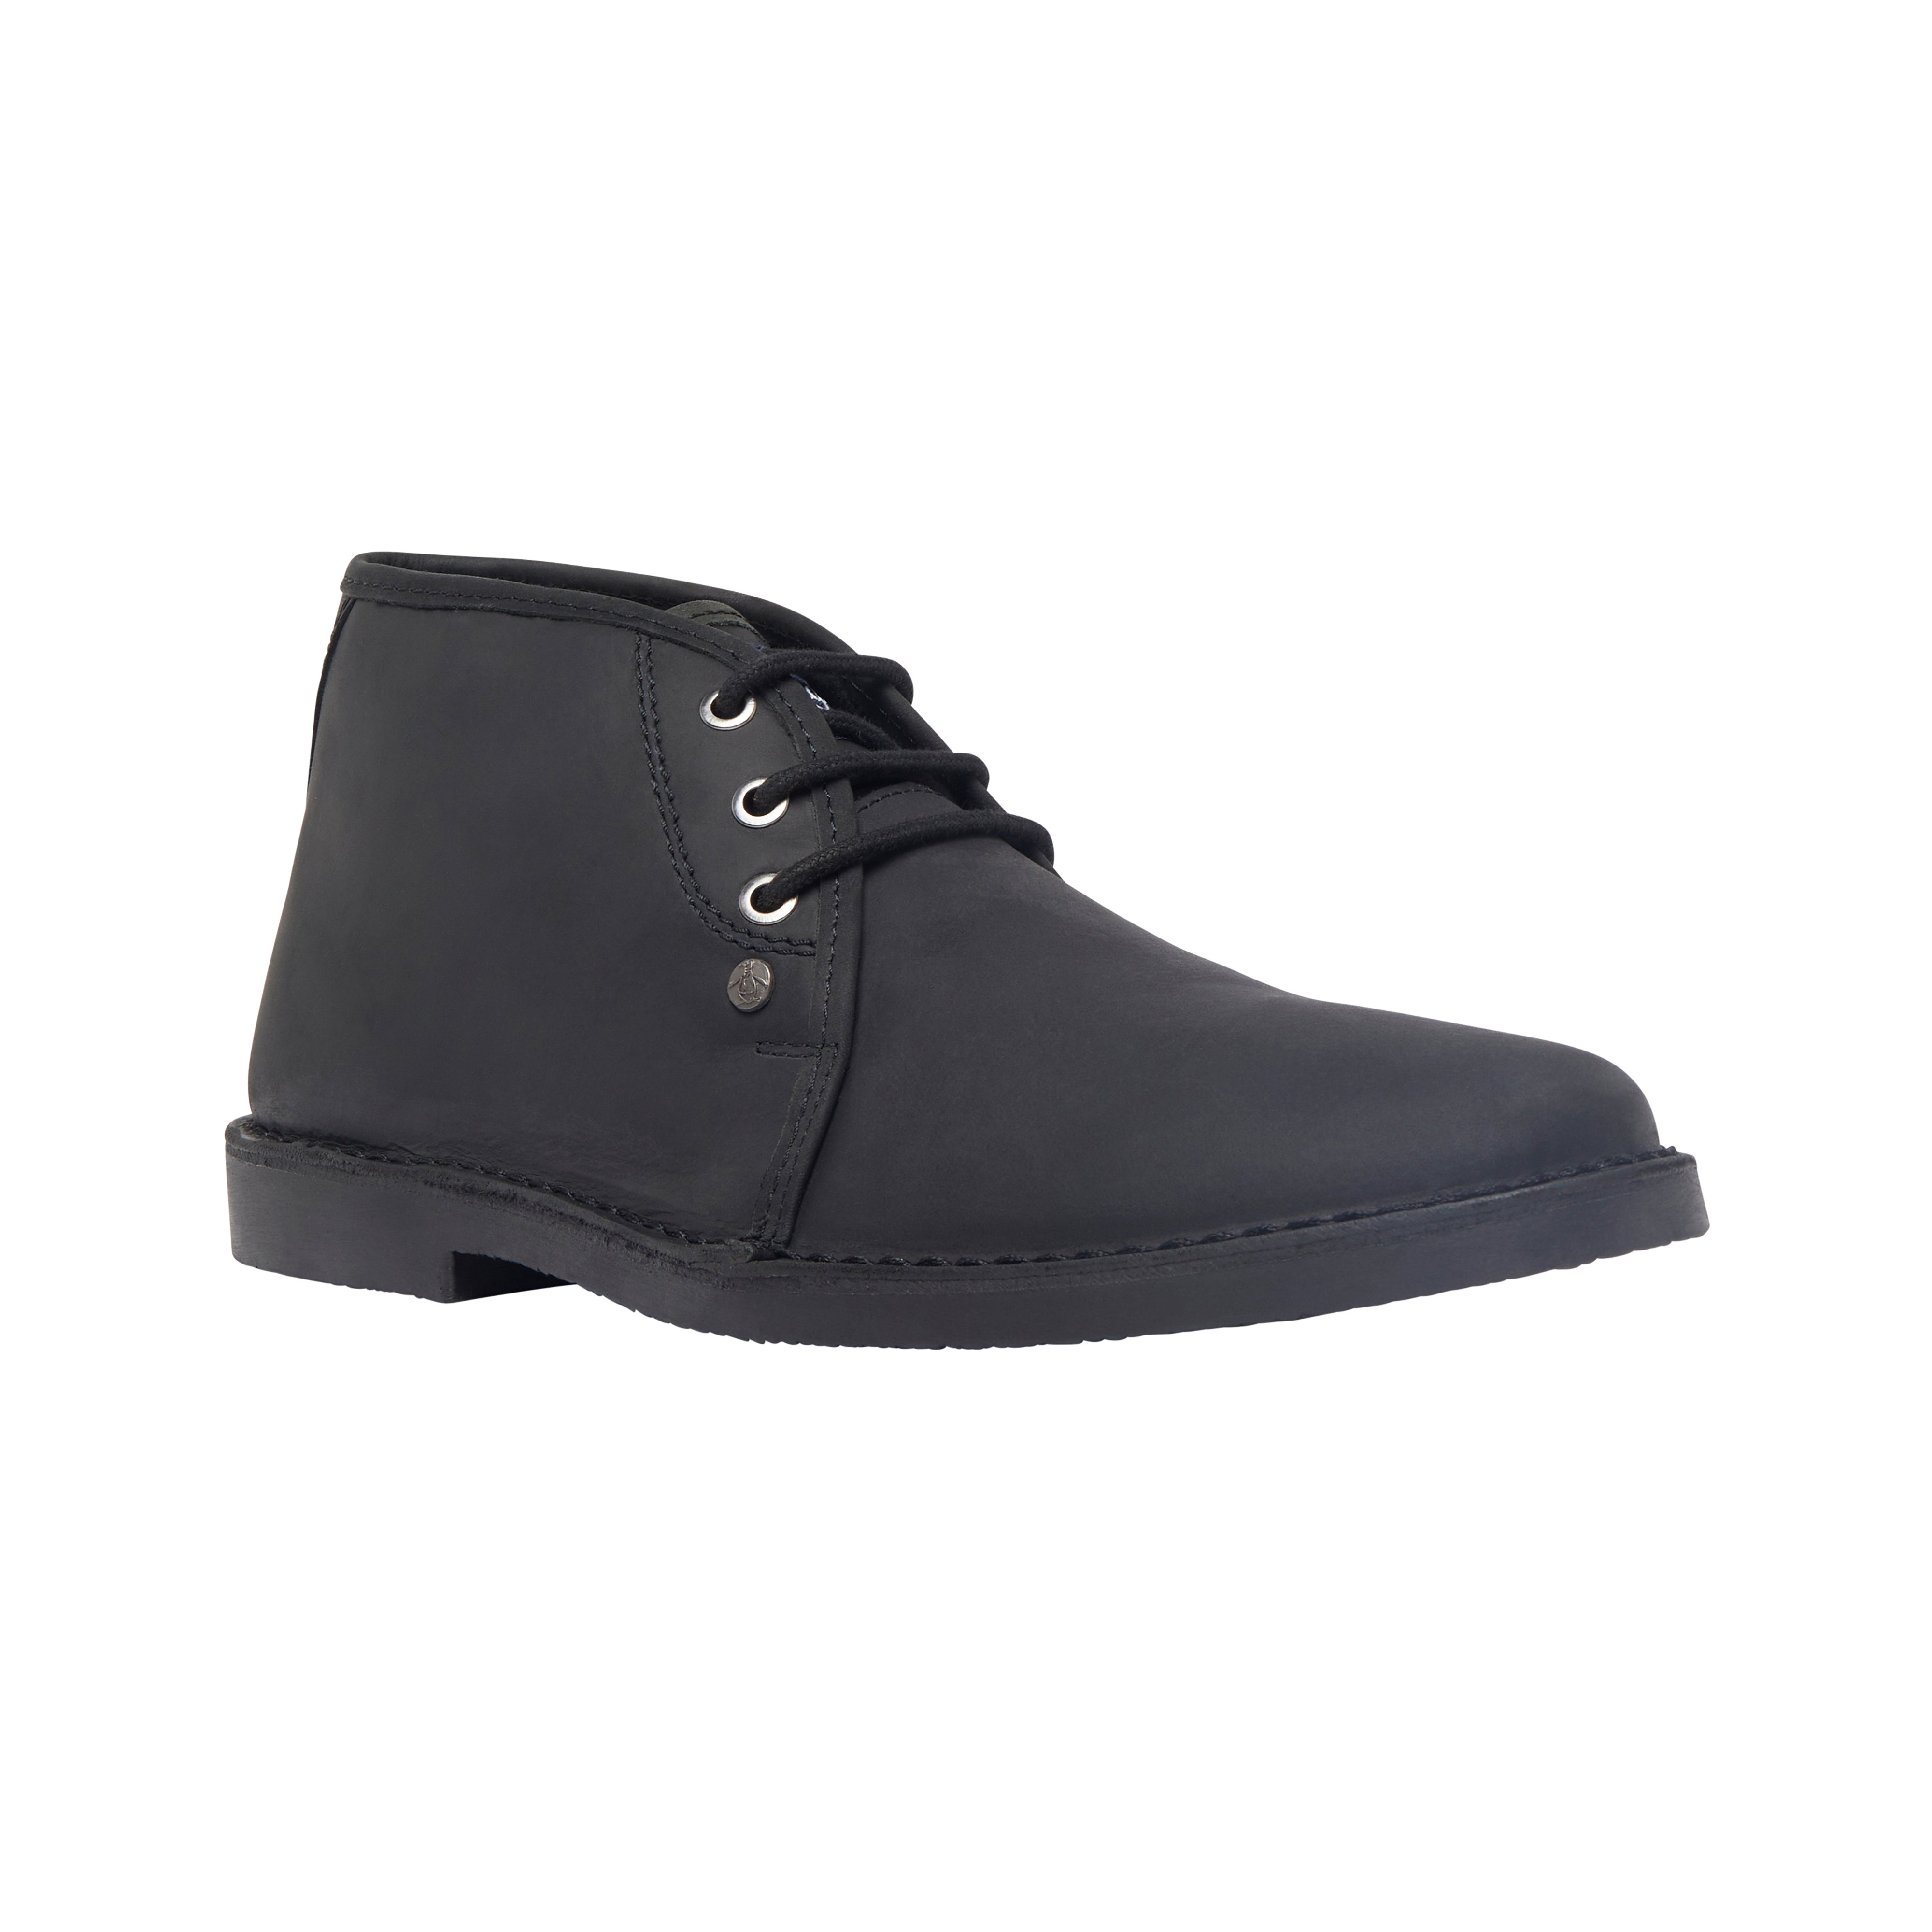 View Legal Leather Boot In Black information